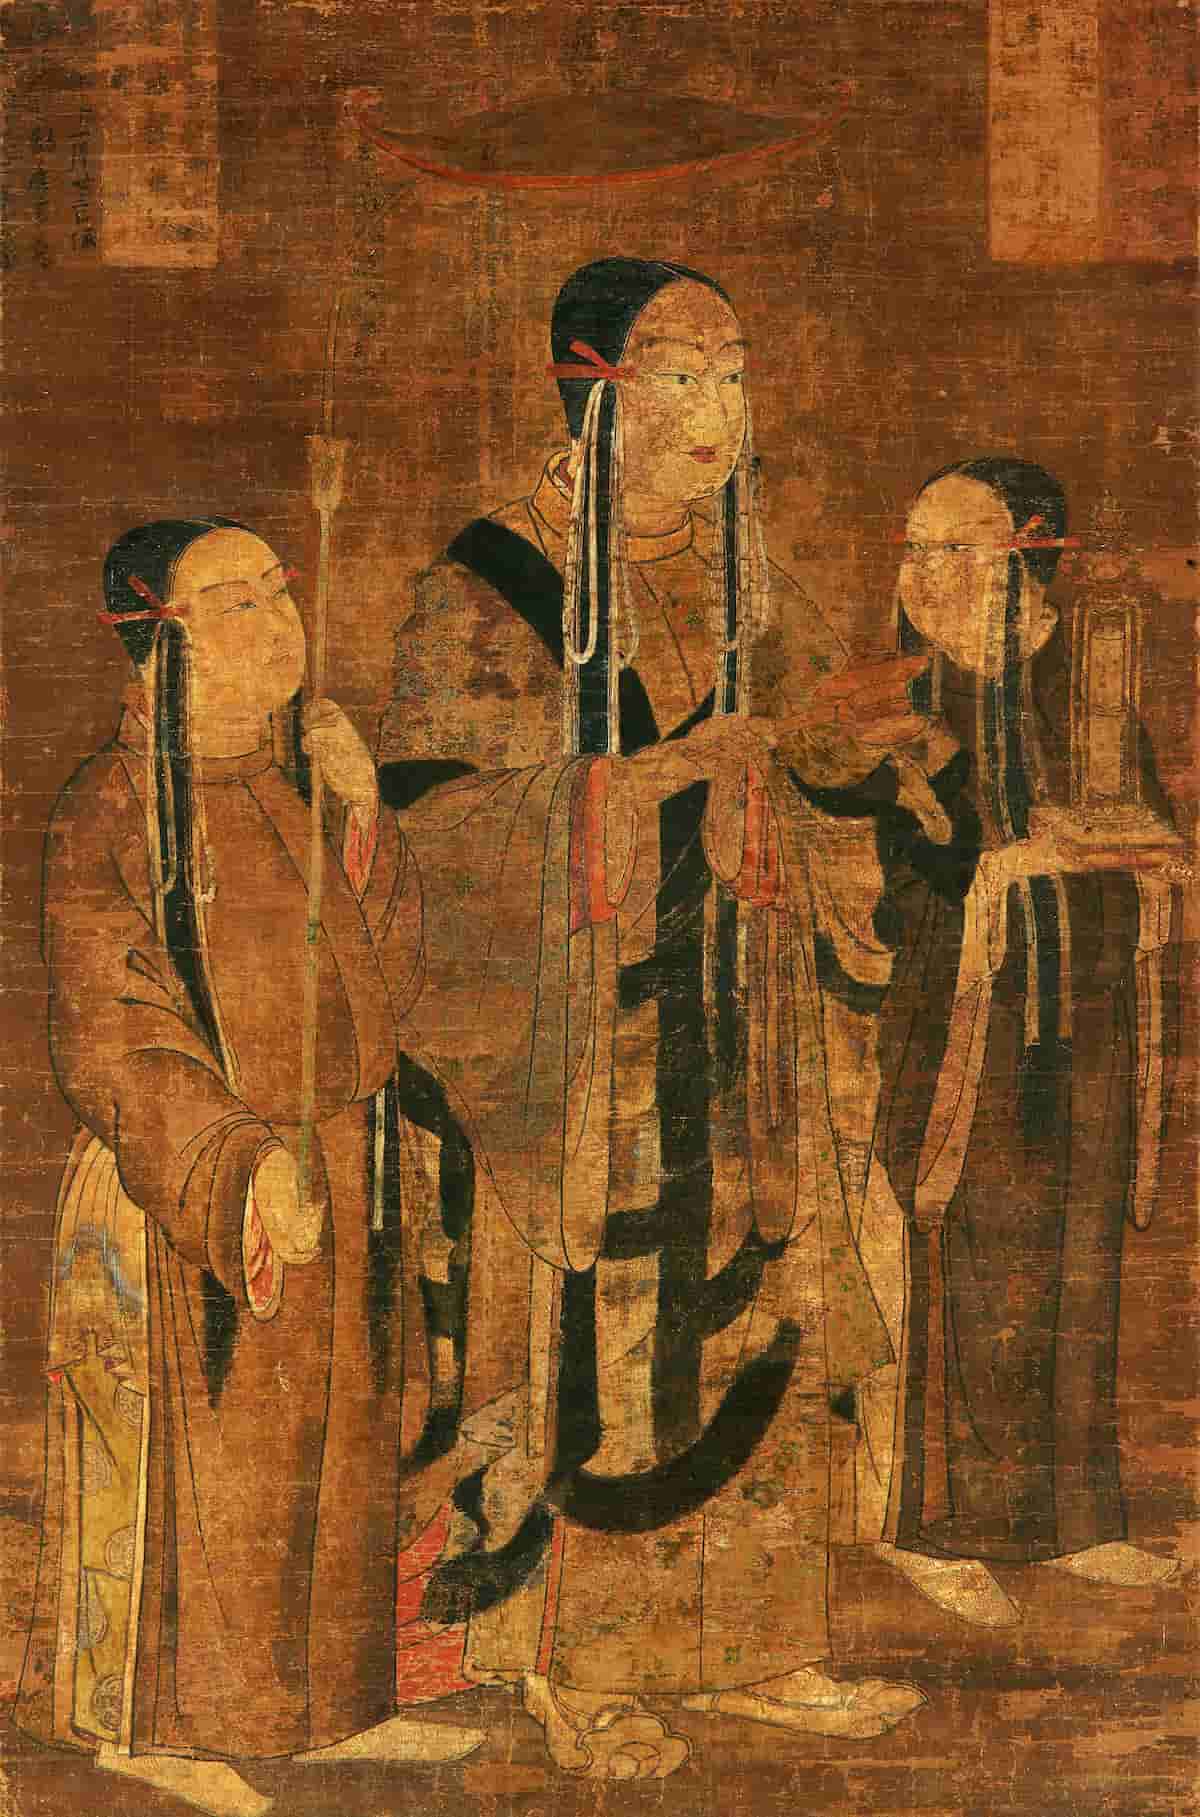 Prince Shotoku with Attendants - 13th century - Land Of The Rising Son